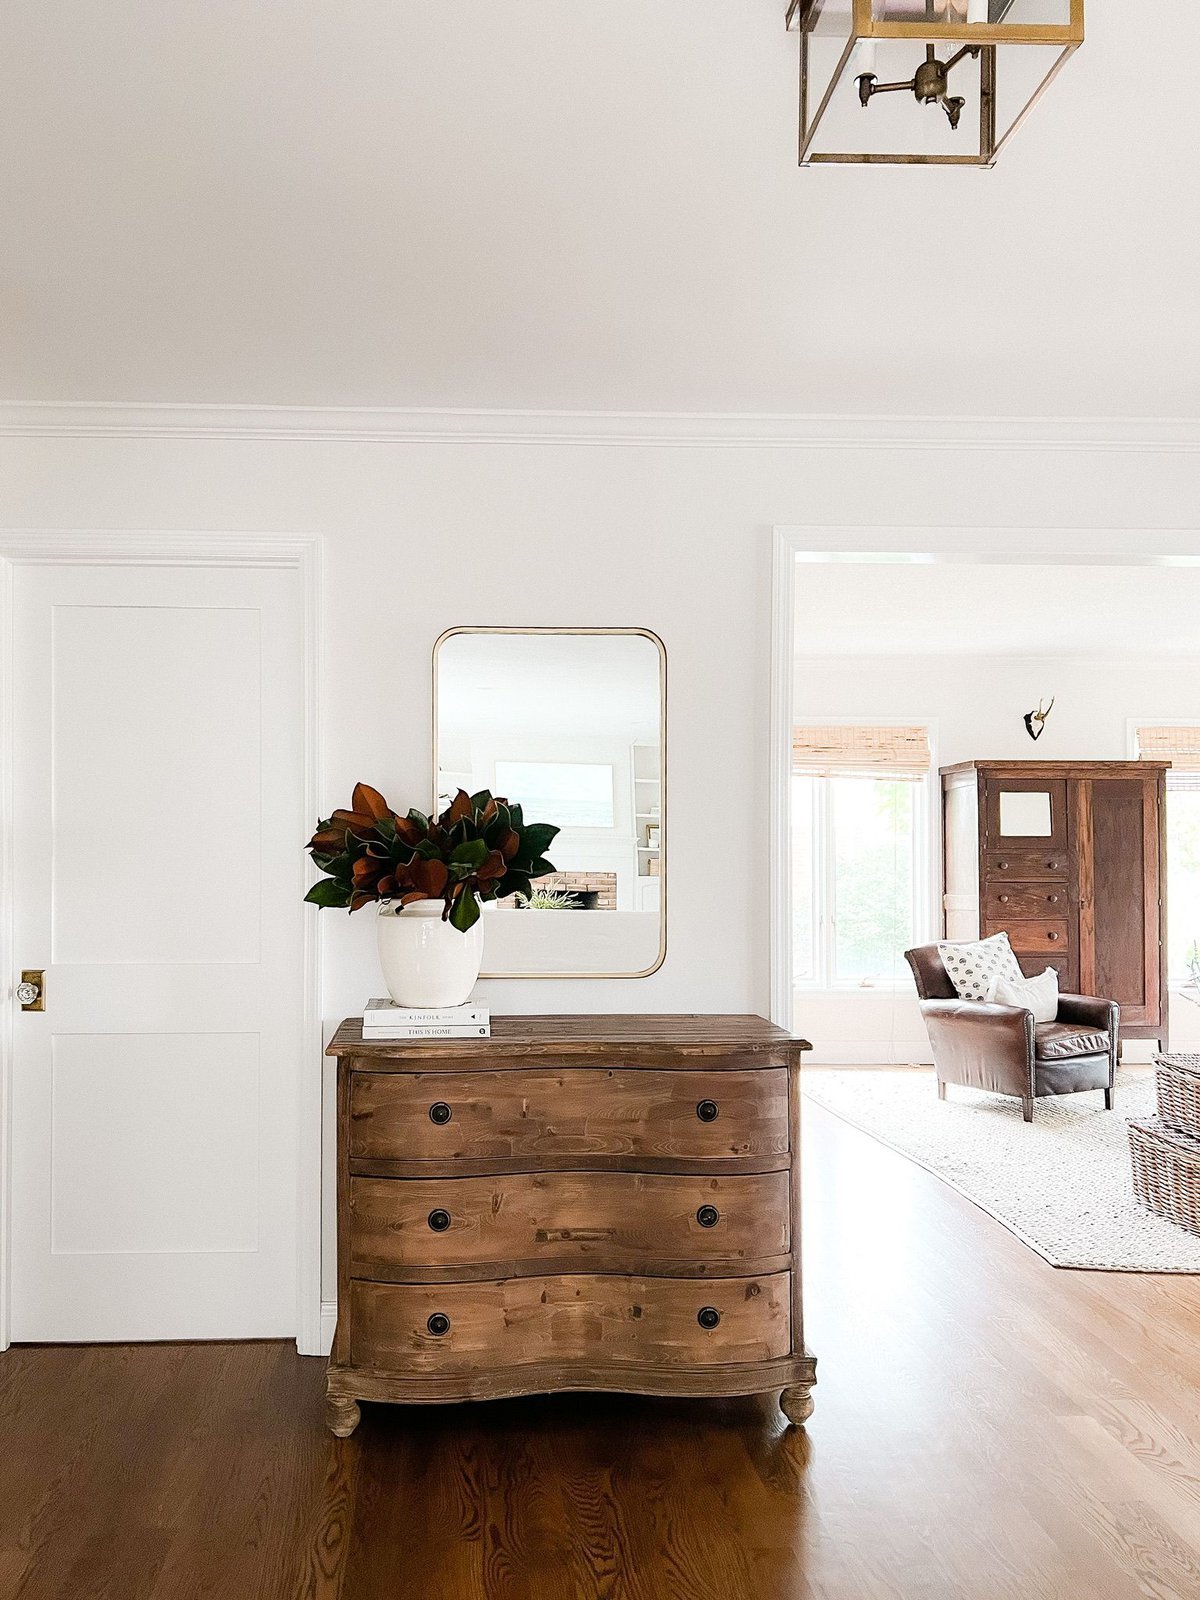 An entryway in a home with wood floors and a wood dresser with magnolia branches in a vase TeamJiX